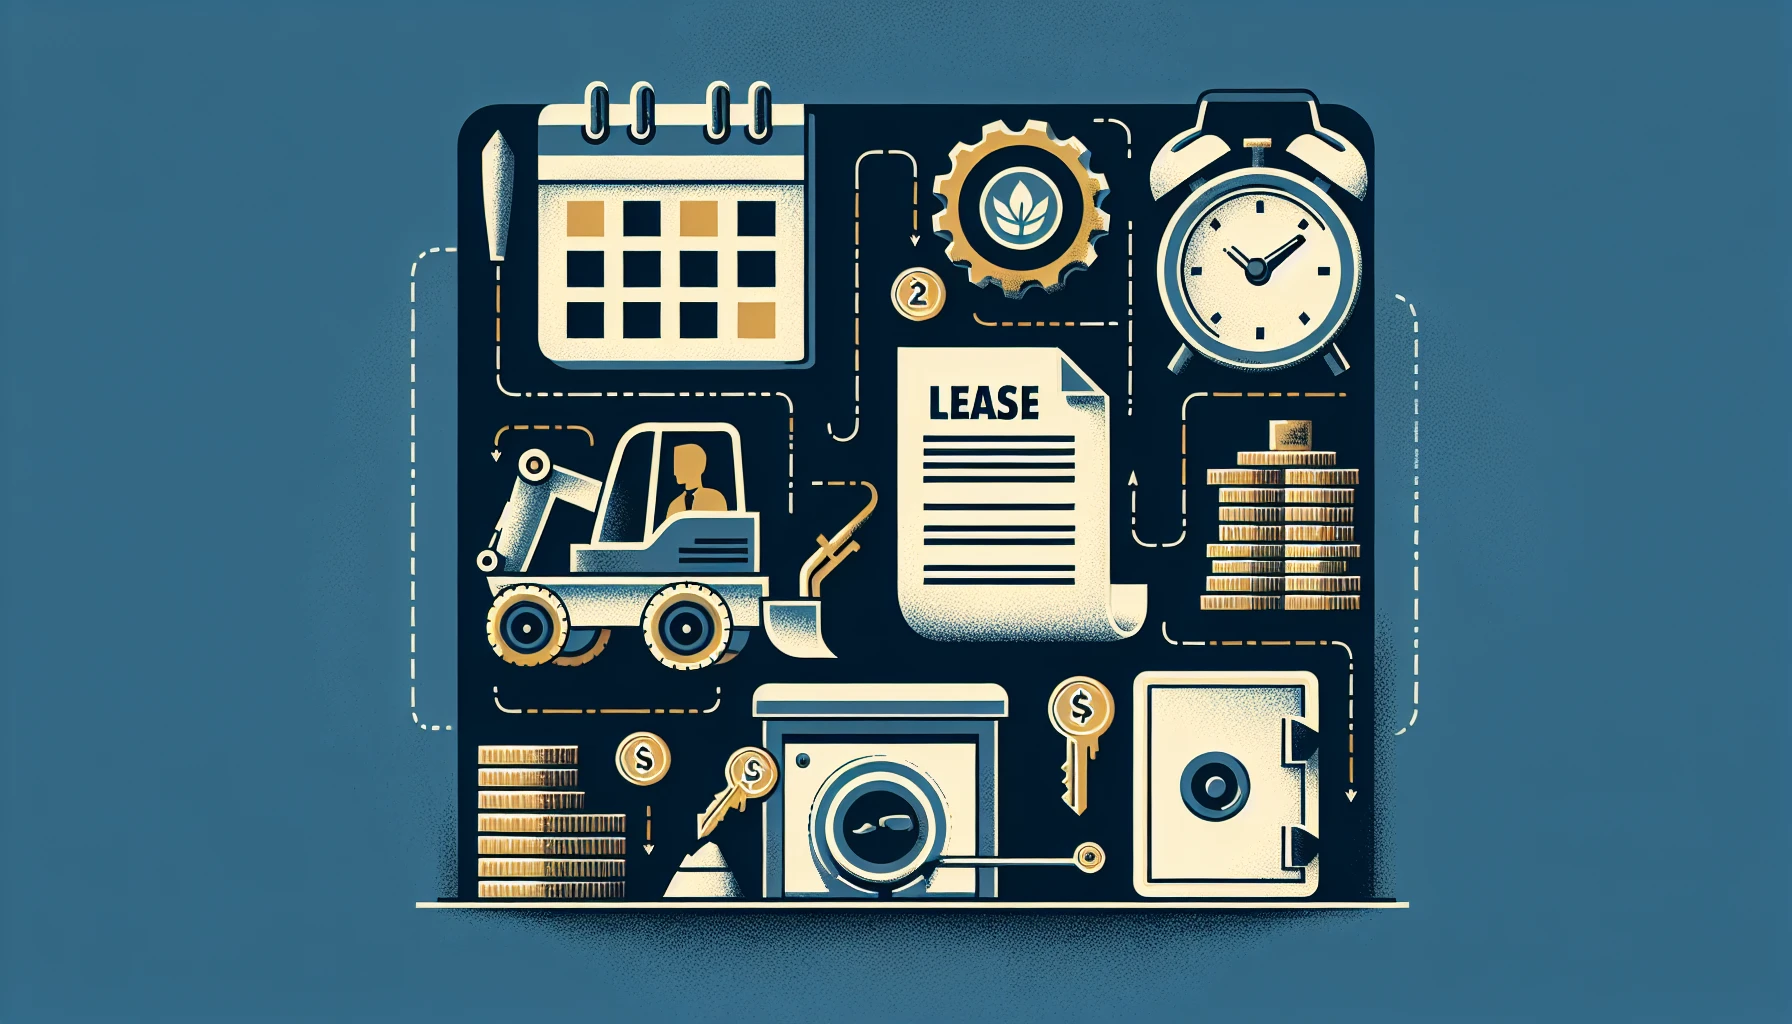 Equipment lease agreement components